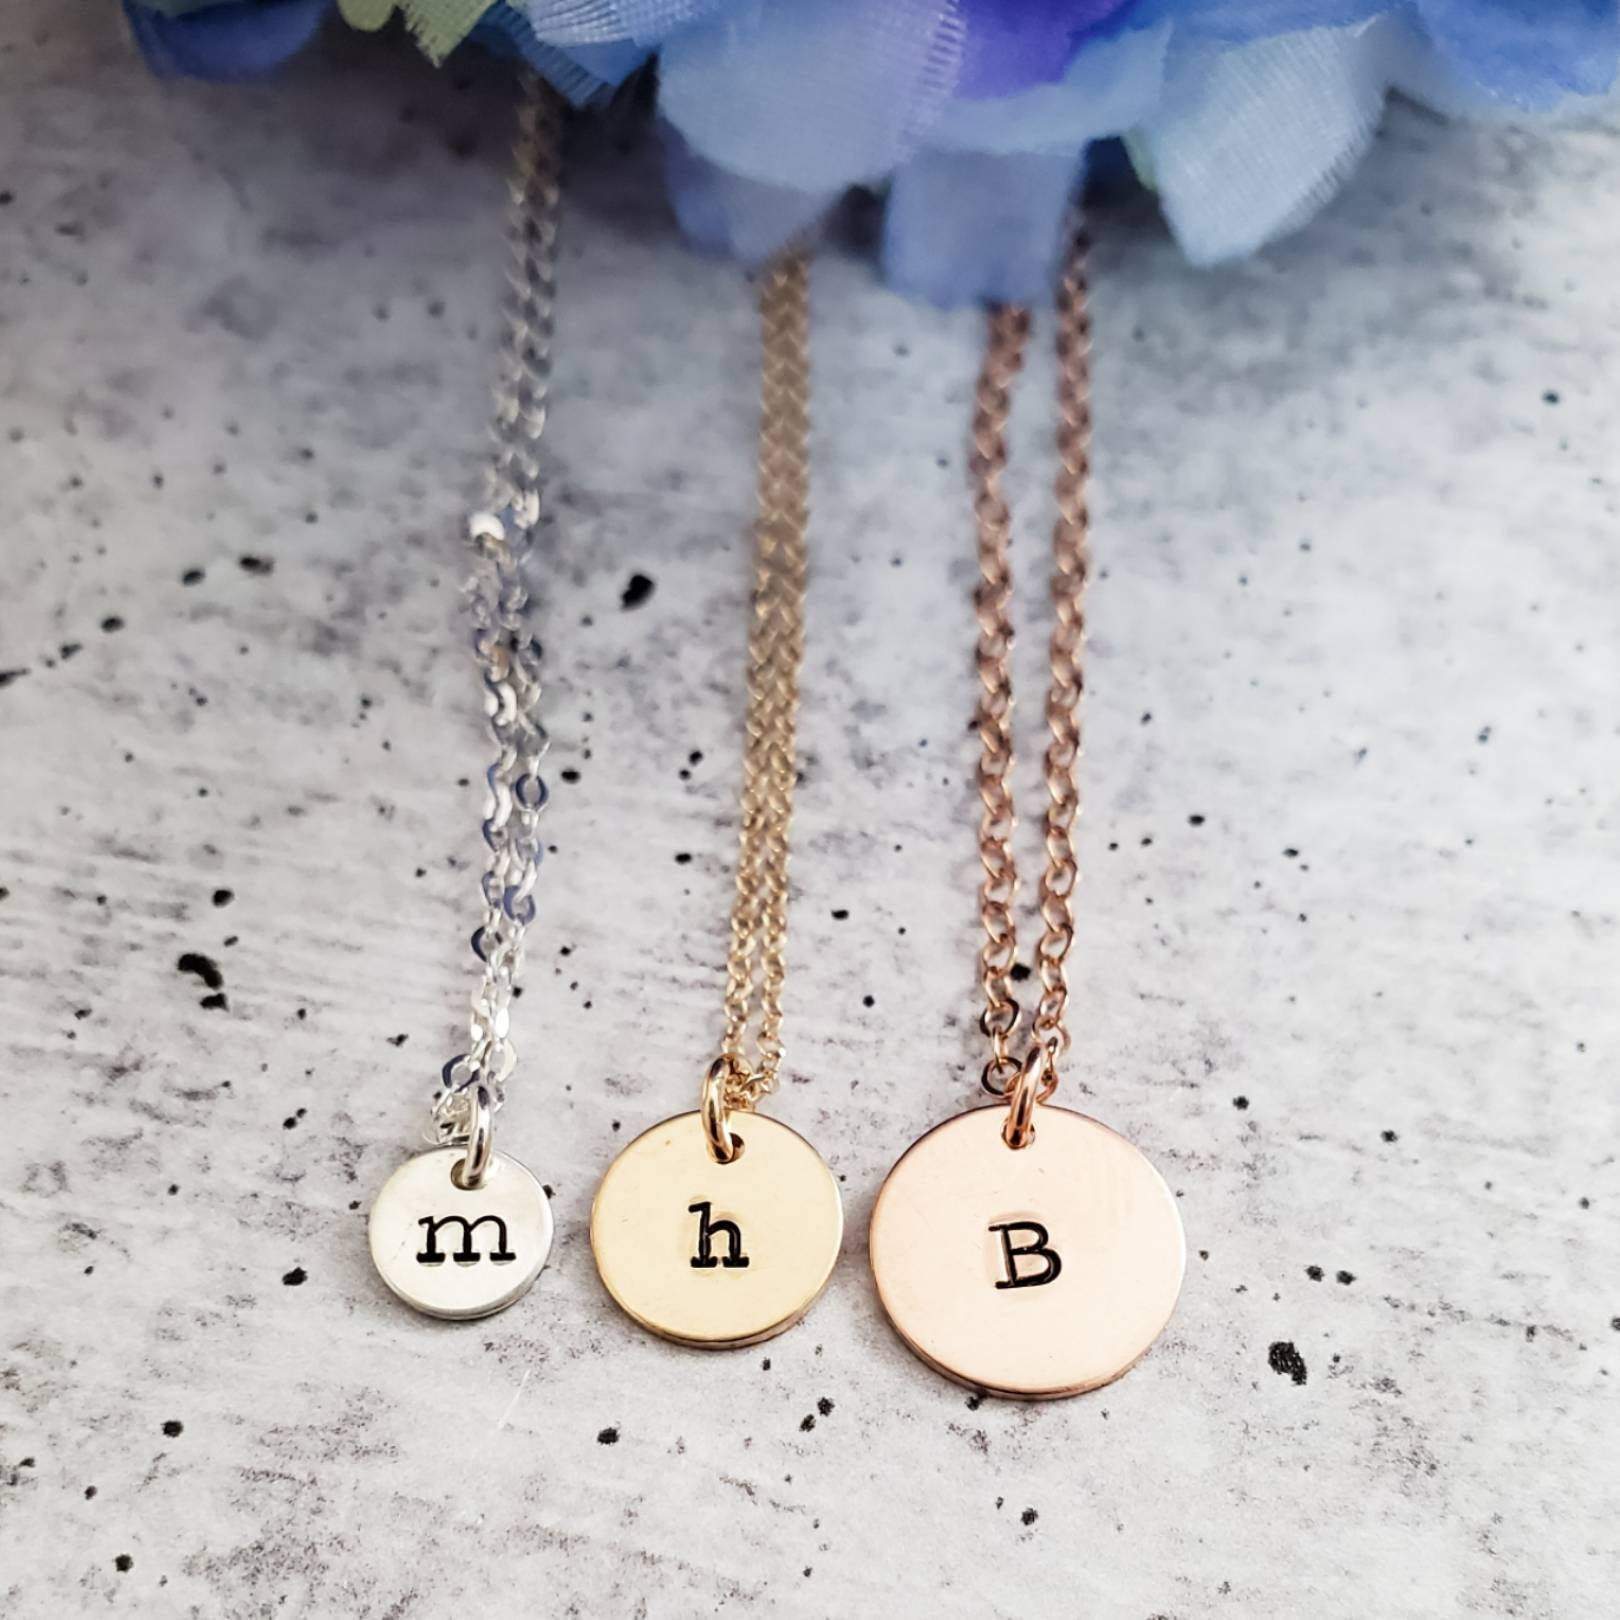 1/2 Disc Personalized Letter Charm Necklace Yellow Gold Filled Initial  Pendant Hand Stamped Jewelry Customized Disc Size 13mm - Etsy | Stamped  initial necklace, Initial necklace, Initial jewelry